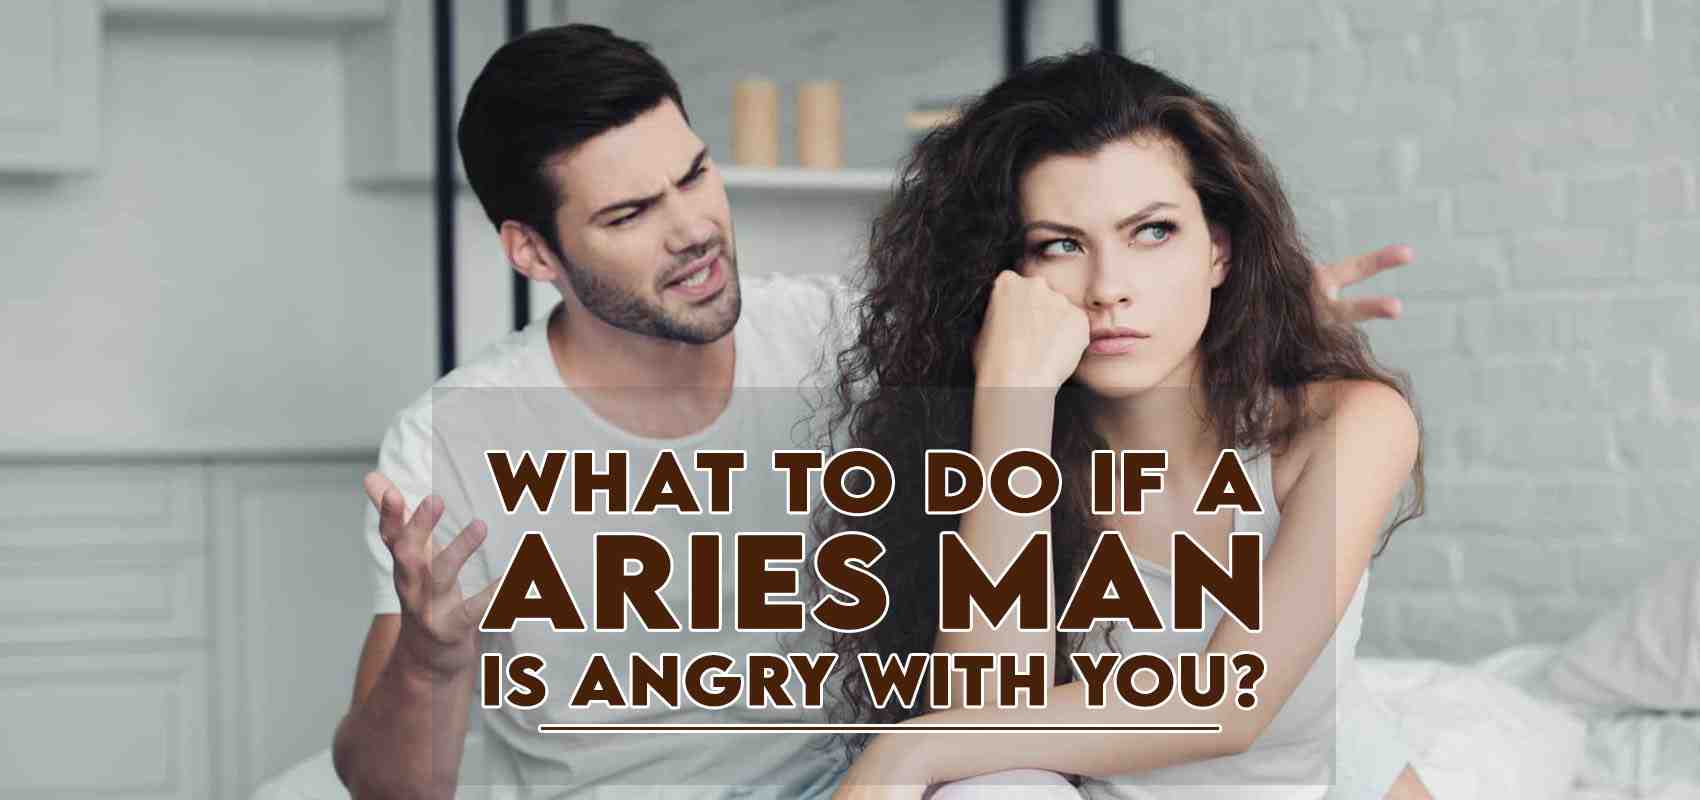 What To Do If A Aries Man Is Angry With You » How to Make Anyone Love You!